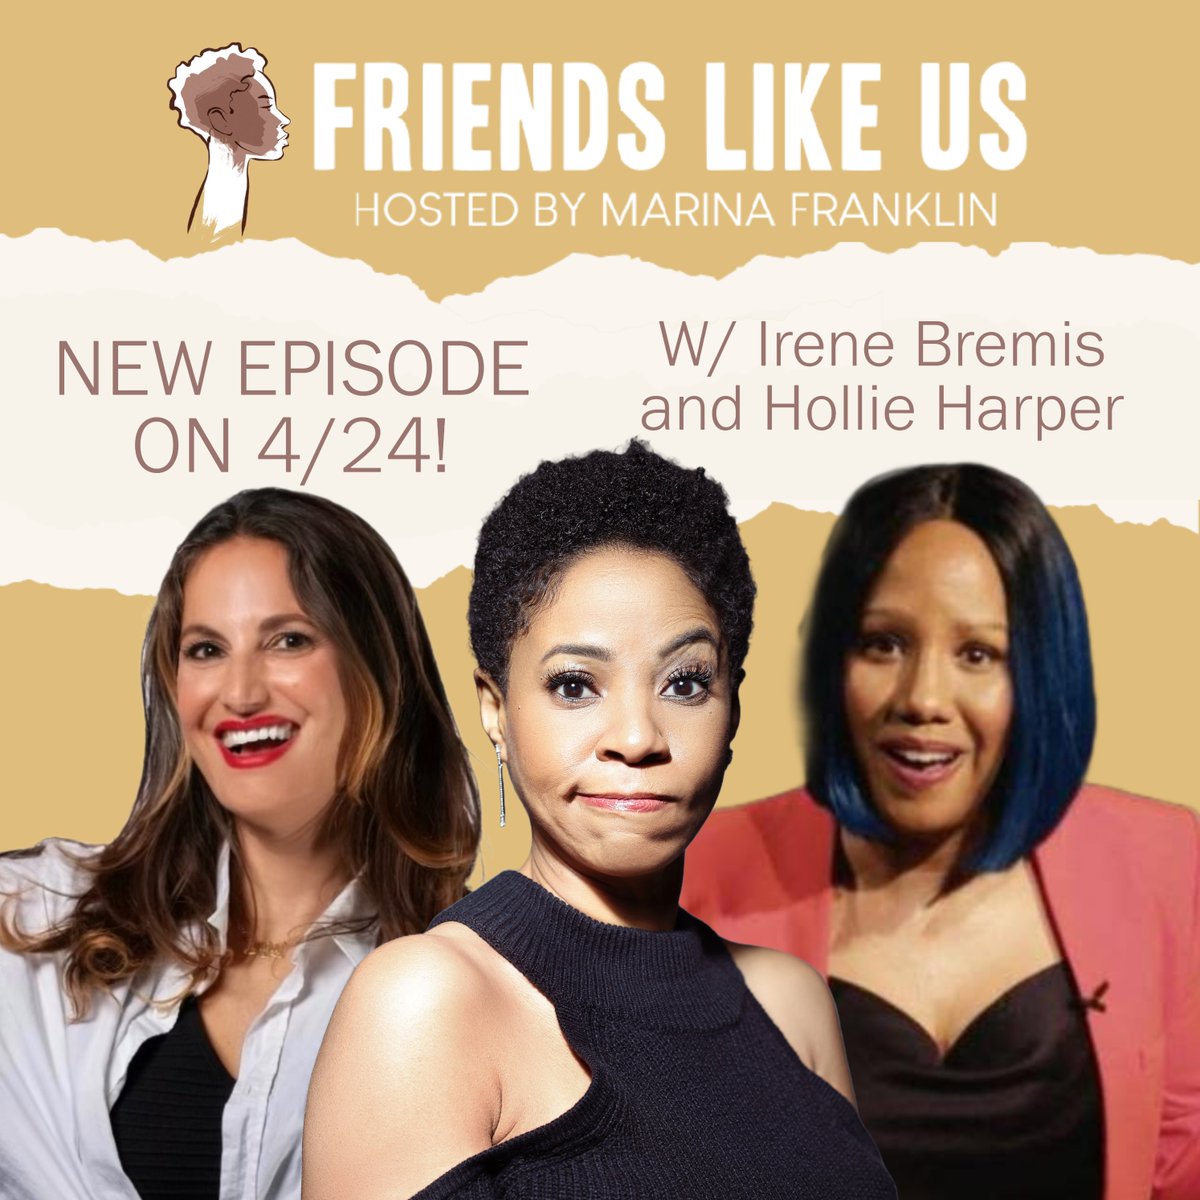 NEW CONTENT ALERT! A new episode of Friends Like Us with host @marinayfranklin and fabulous friends @irenebremis13 @HollieHarper5  is coming out on 04/24!

#CheckUsOut #FriendsLikeUs and #subscribe here: ow.ly/13YS50JqNJv